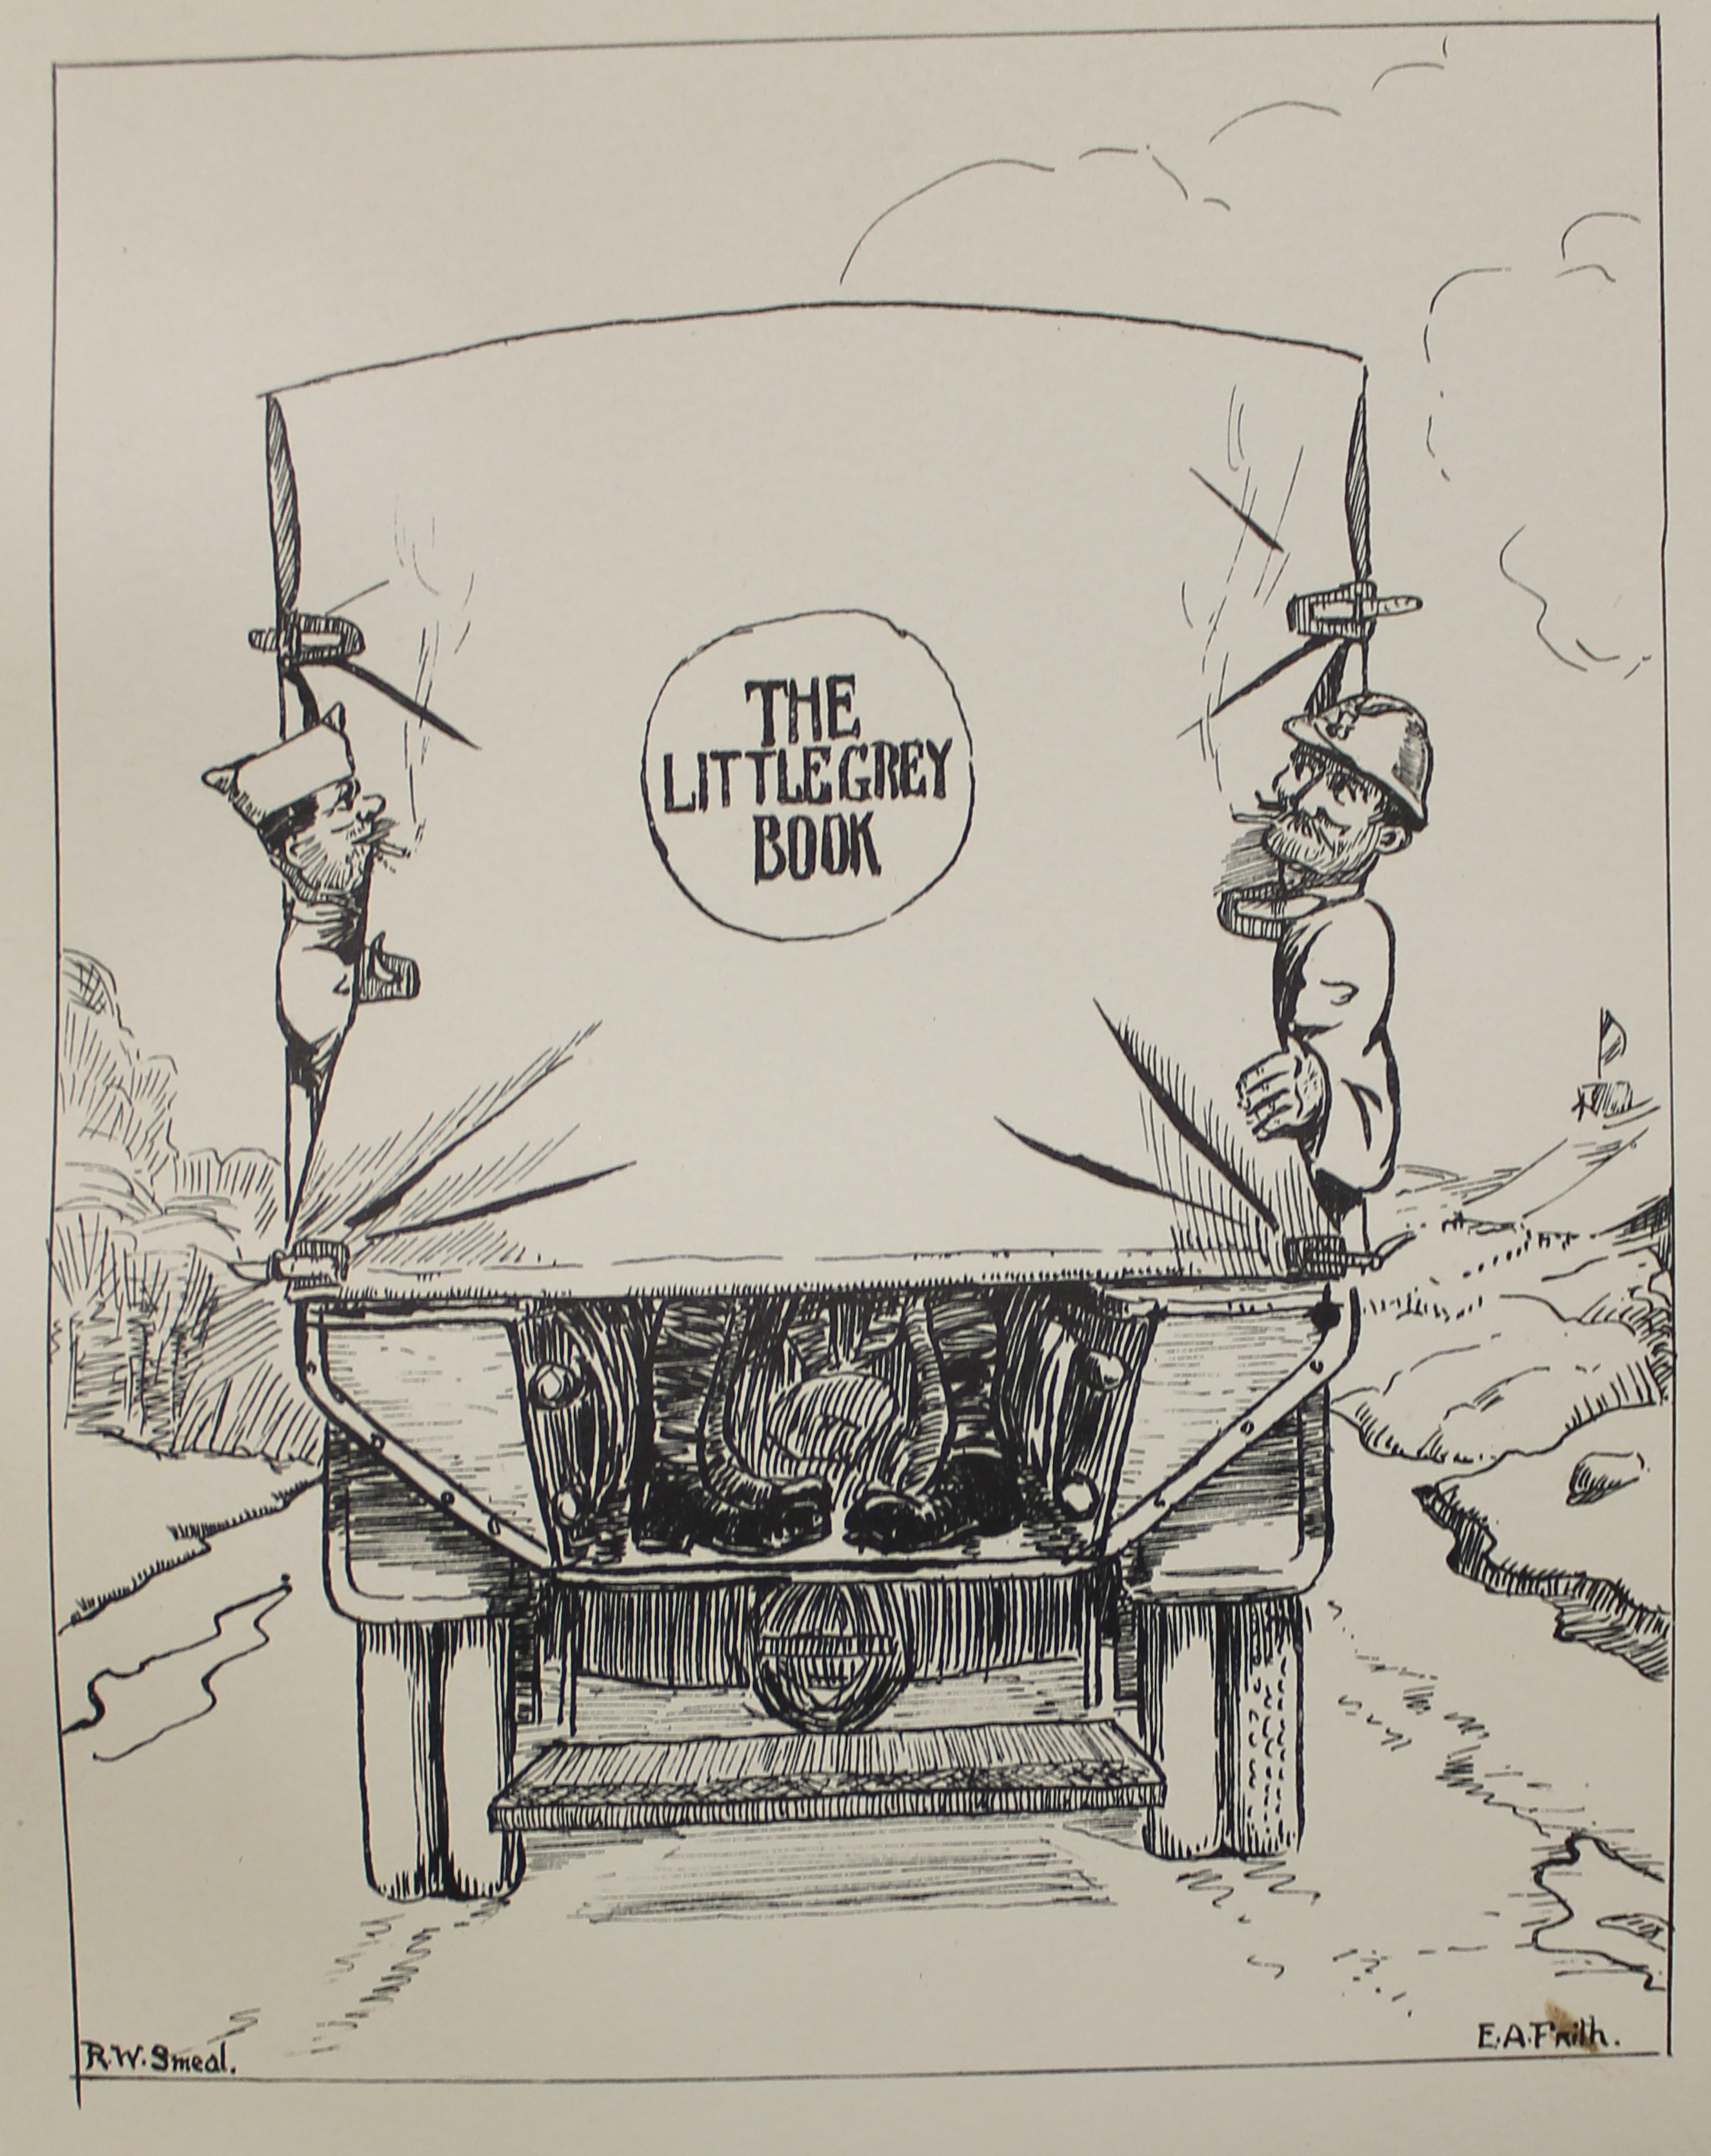 Illustration inside cover of The little grey book (being a souvenir volume of the S.S.A. 13)